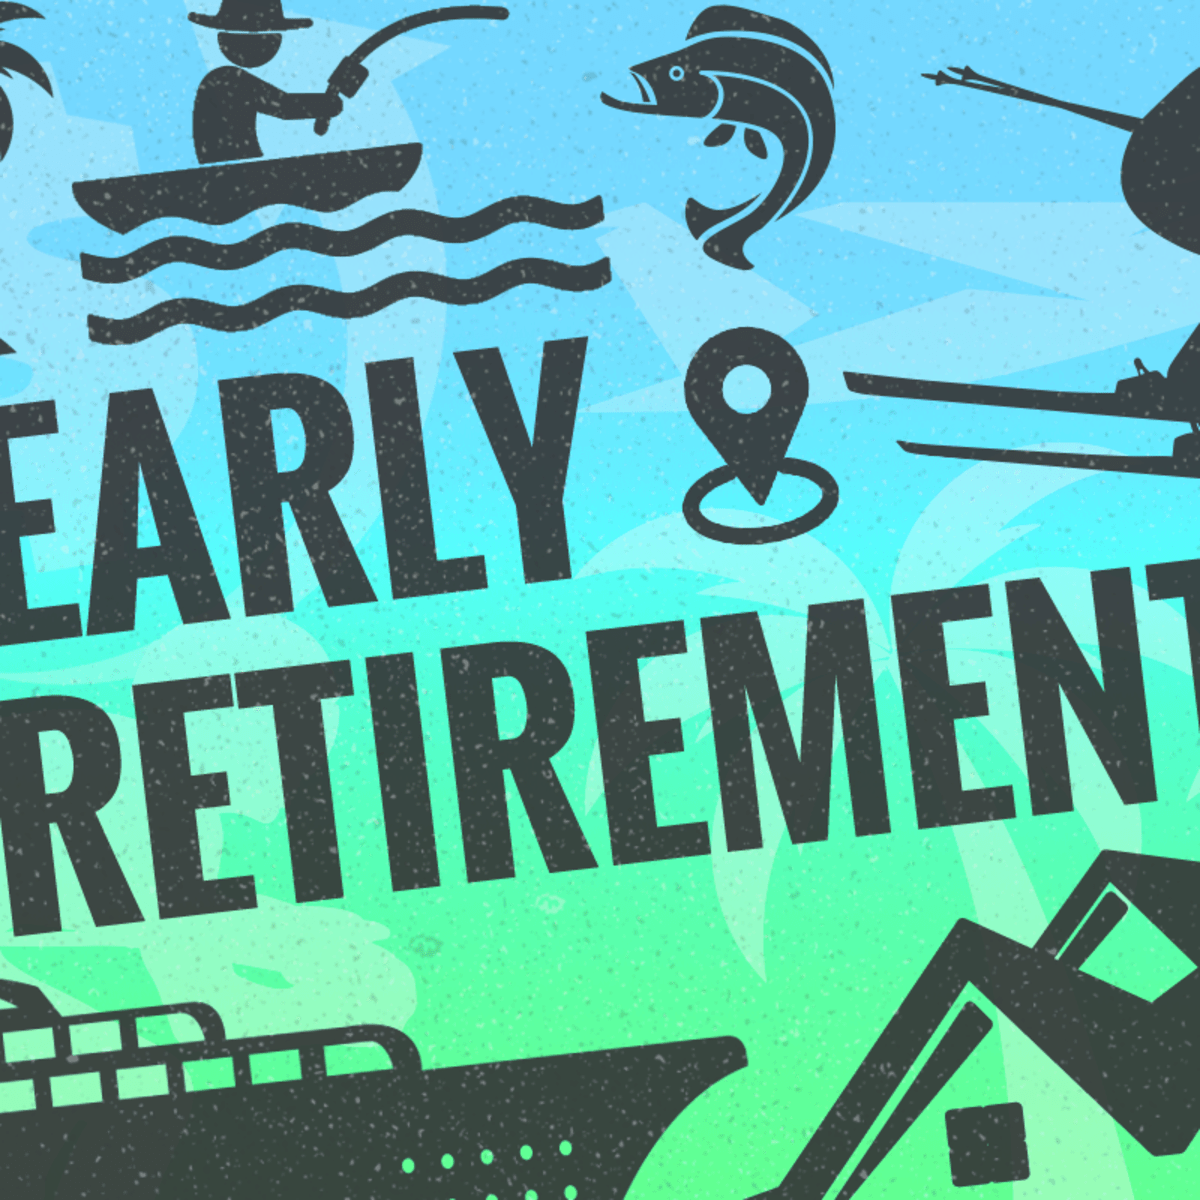 3 Things Stopping You From an Early Retirement